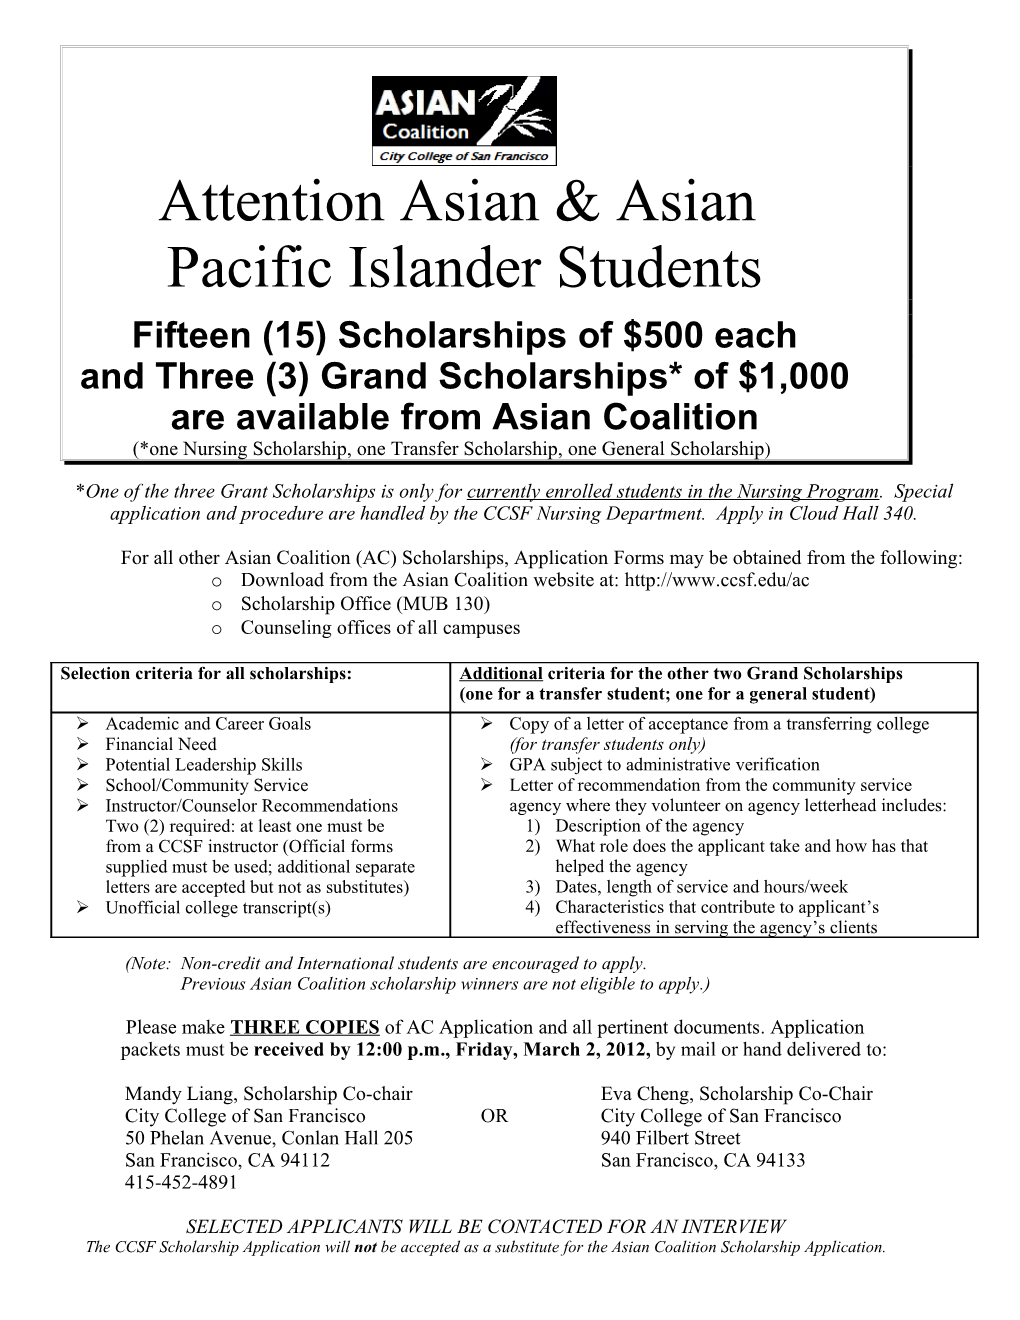 Attention Asian & Asian